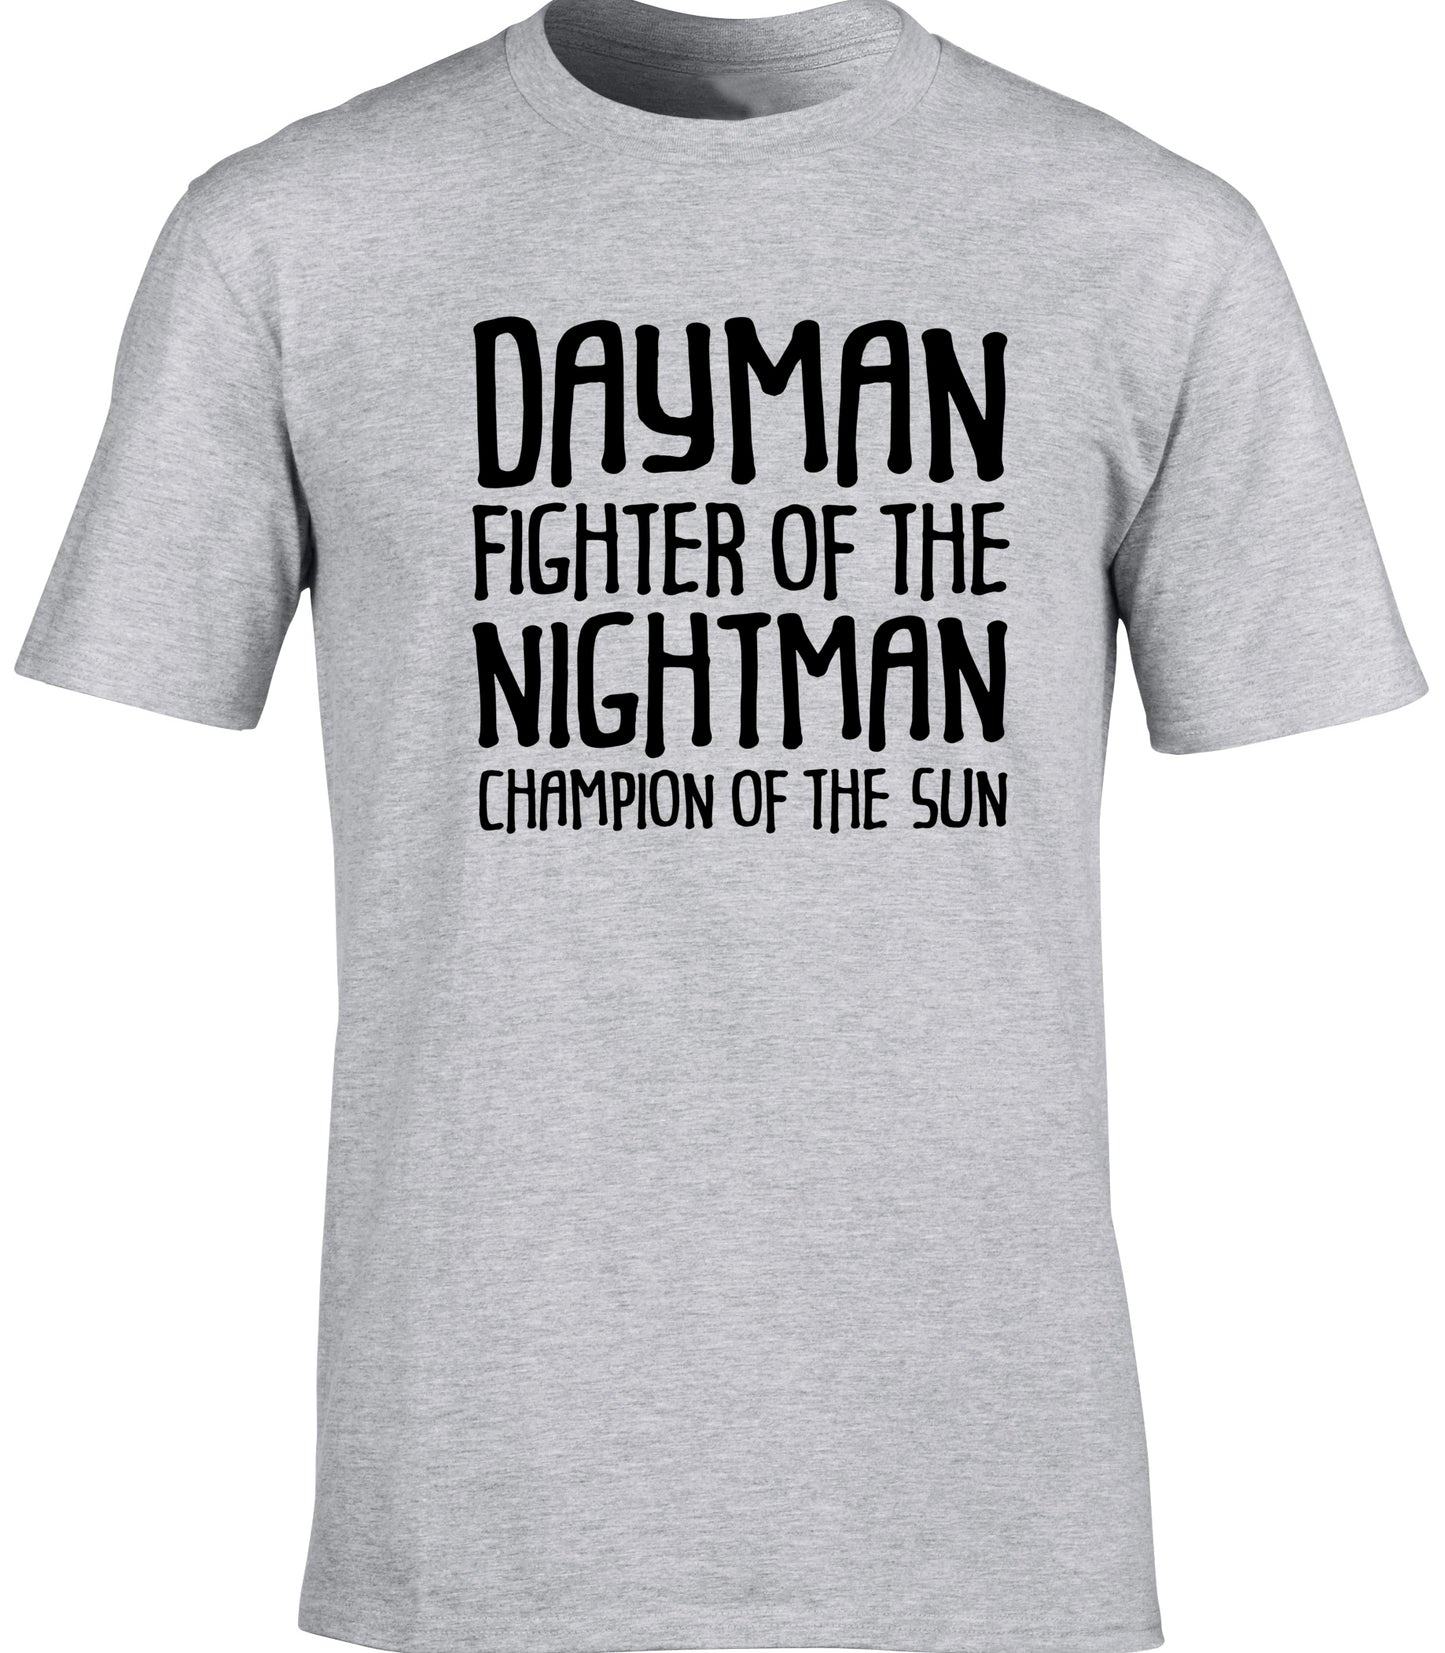 Dayman fighter of the nightman champion of the sun unisex t-shirt